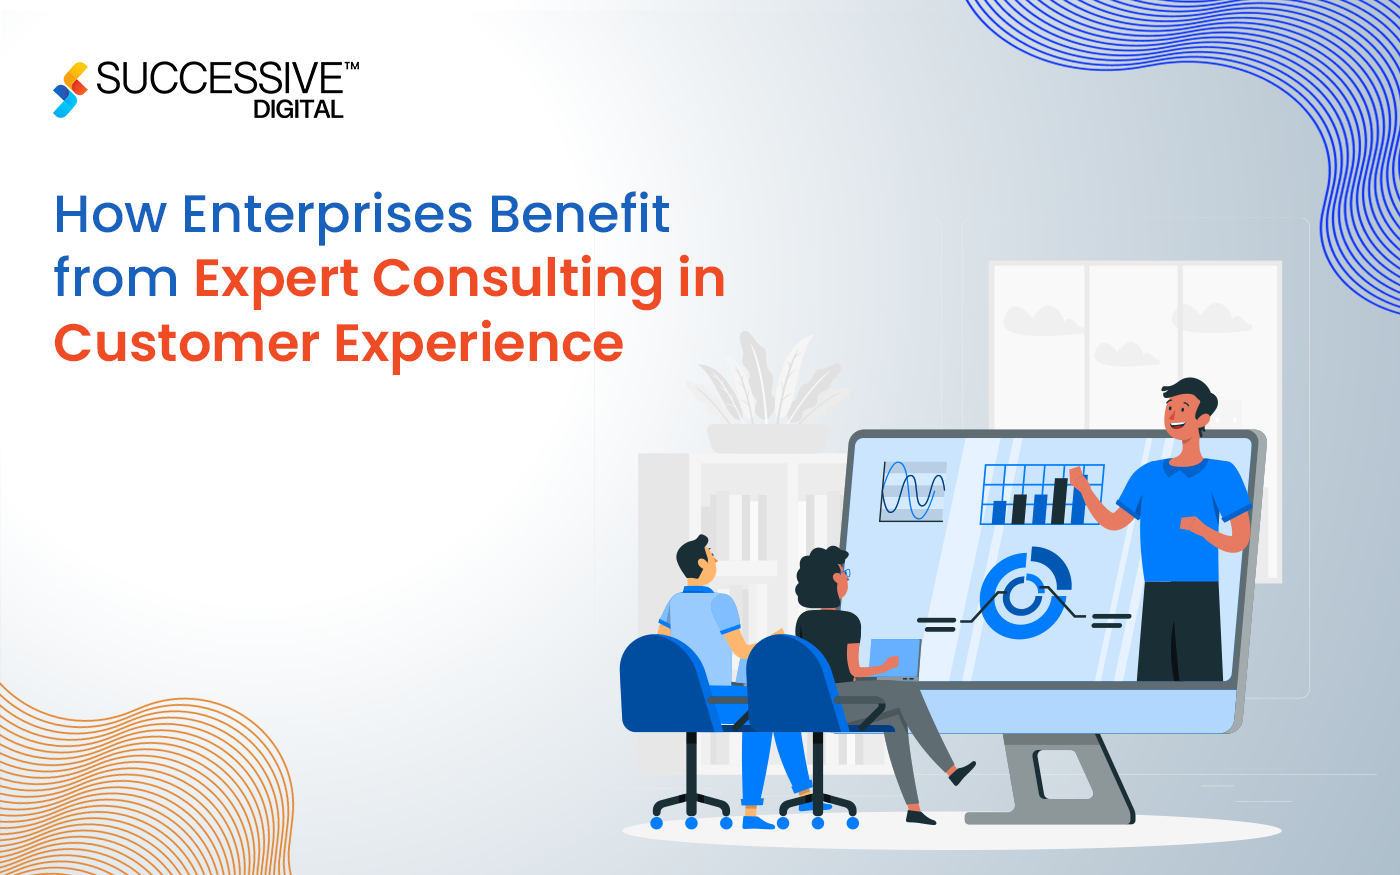 How Enterprises Benefit from Expert Consulting in Customer Experience